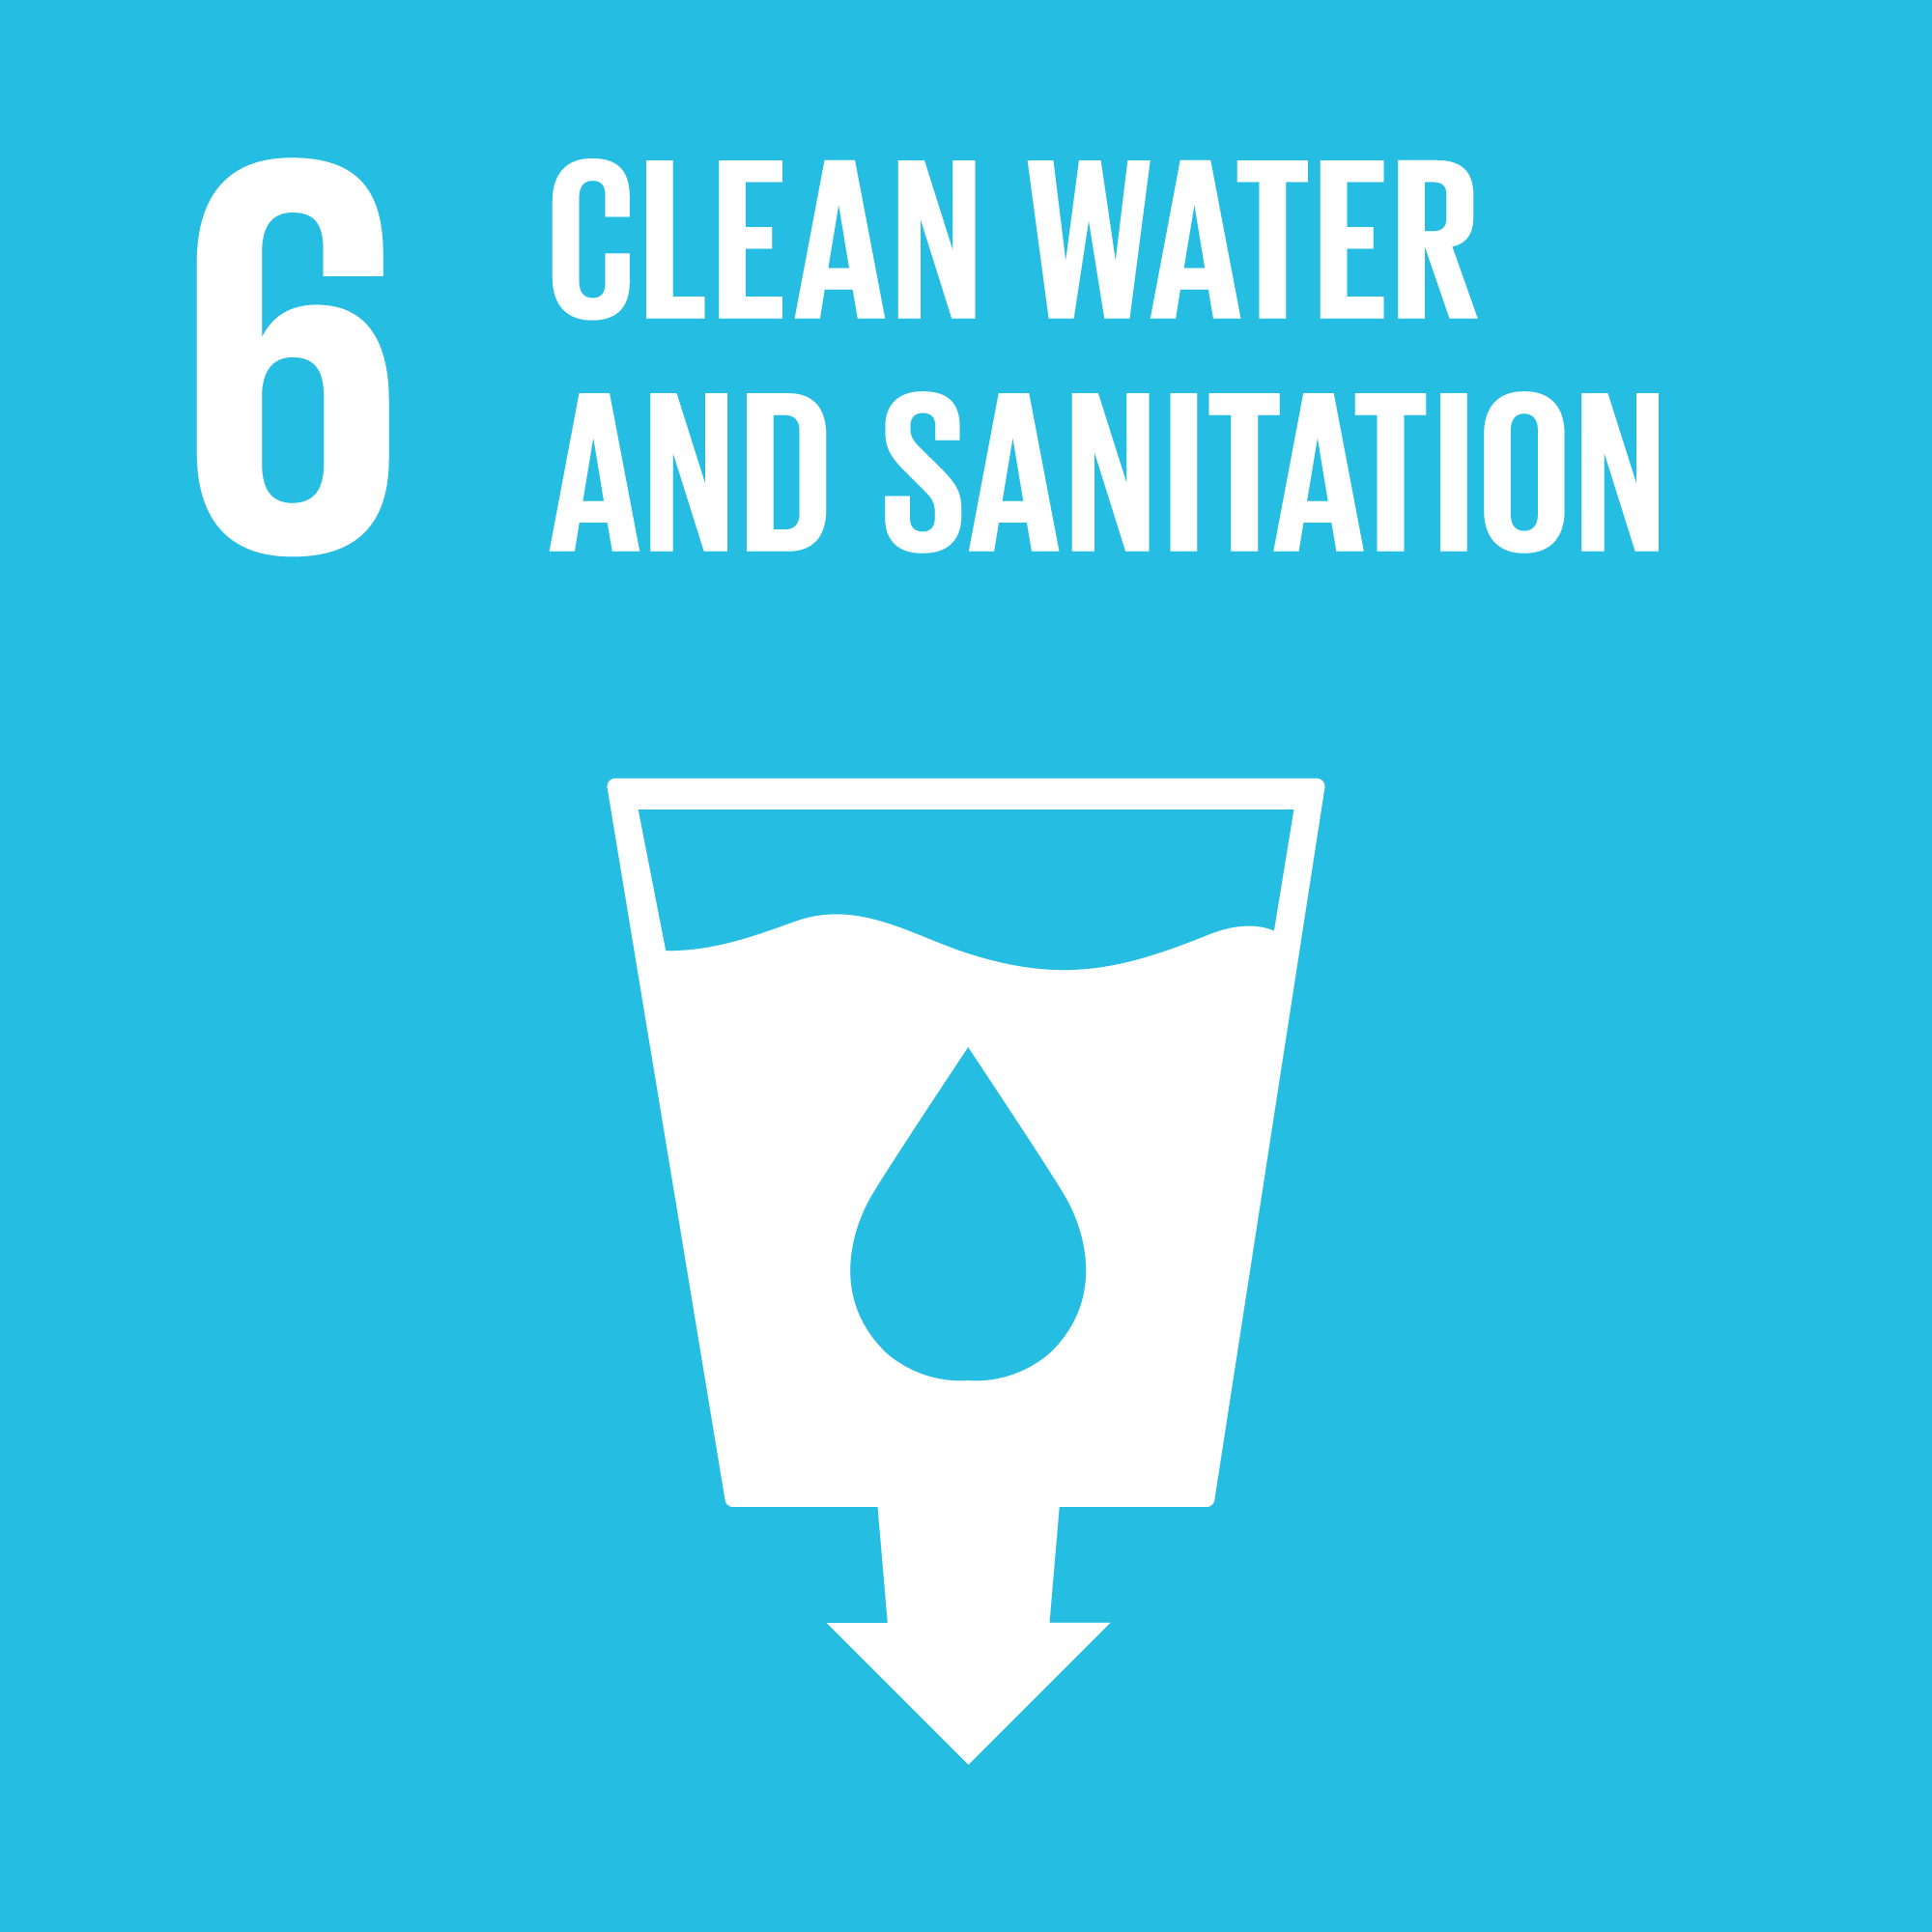 Goal 6: Clean Water and Sanitation - Ensure availability and sustainable management of water and sanitation for all